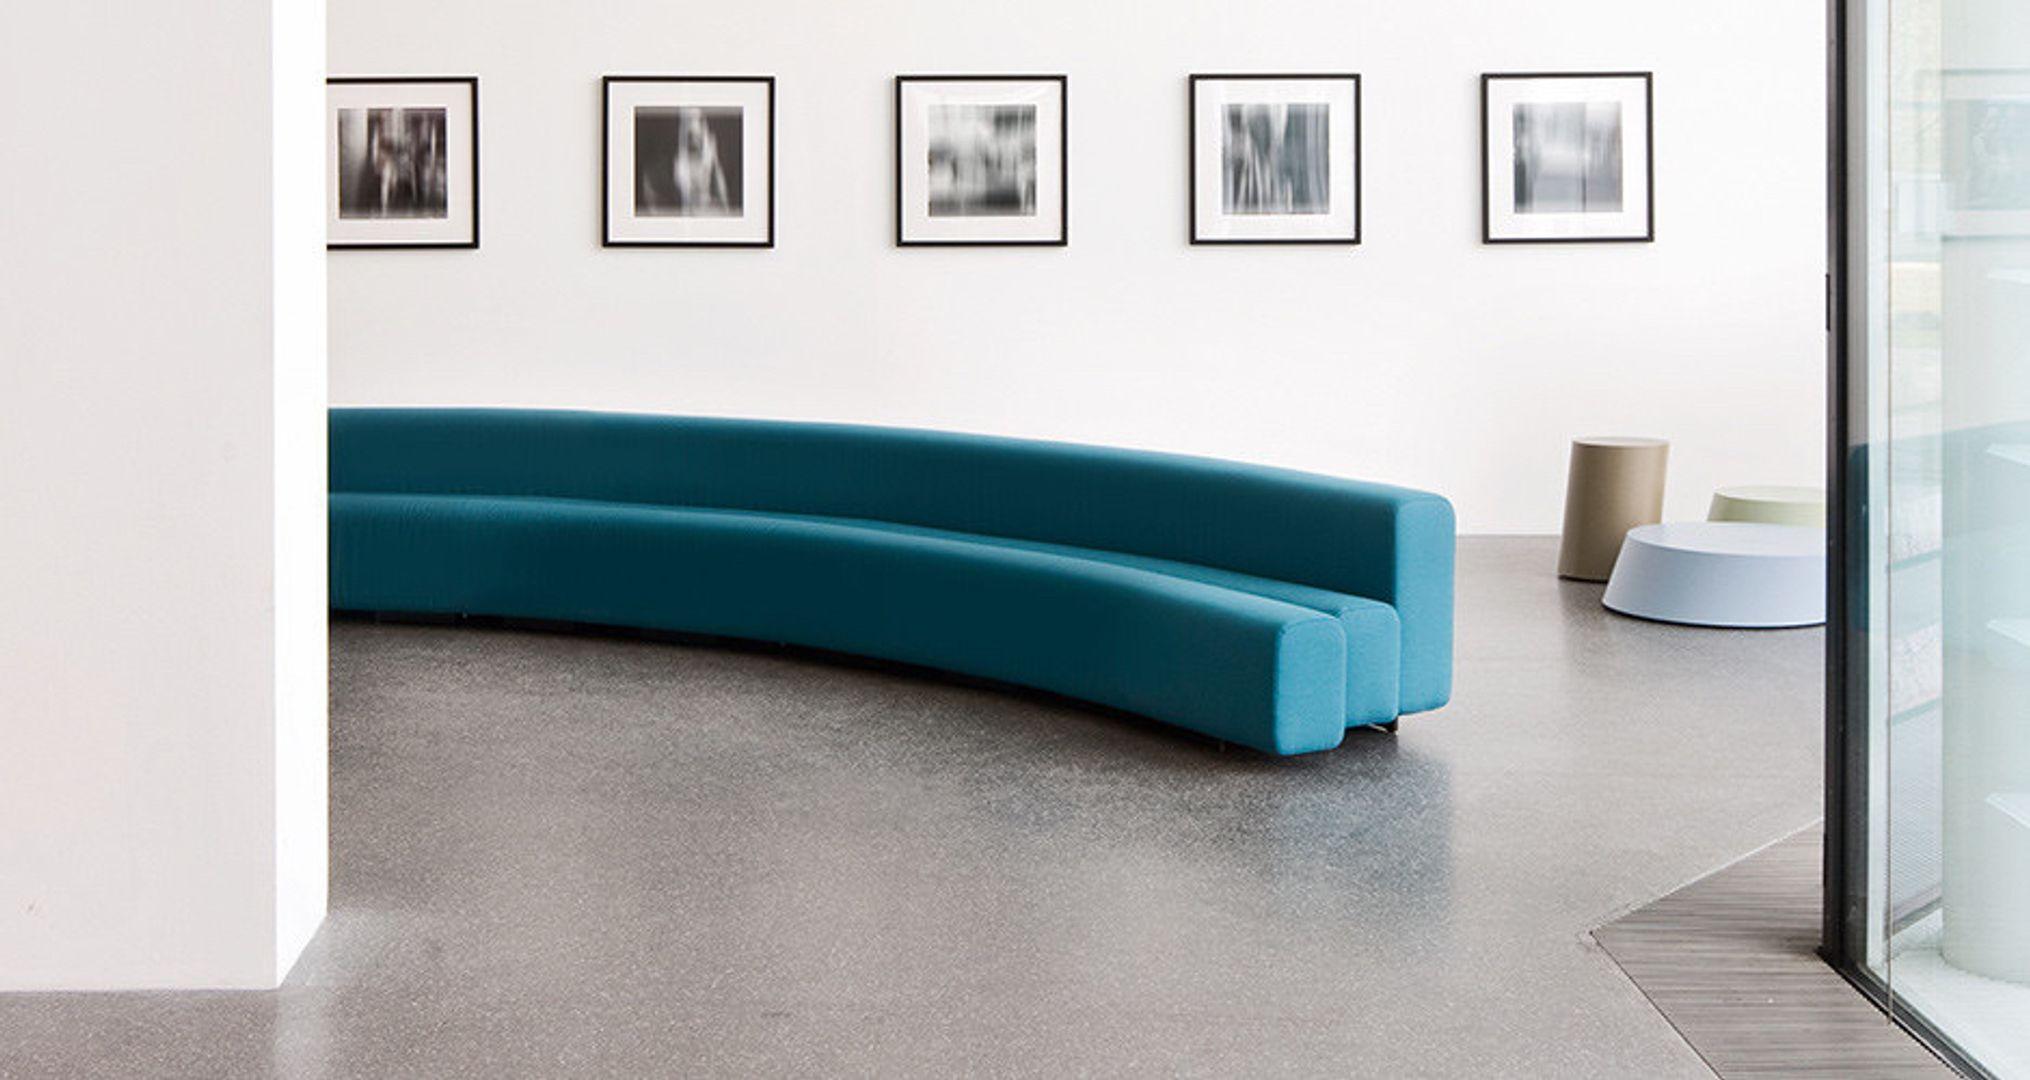 In 1967, the French designer Pierre Paulin challenged the rationalism that was predominant at the time by envisaging a range of seats with naturally winding lines.
Developed for Expo 1970 in the city after which it is named, the Osaka sofa has been